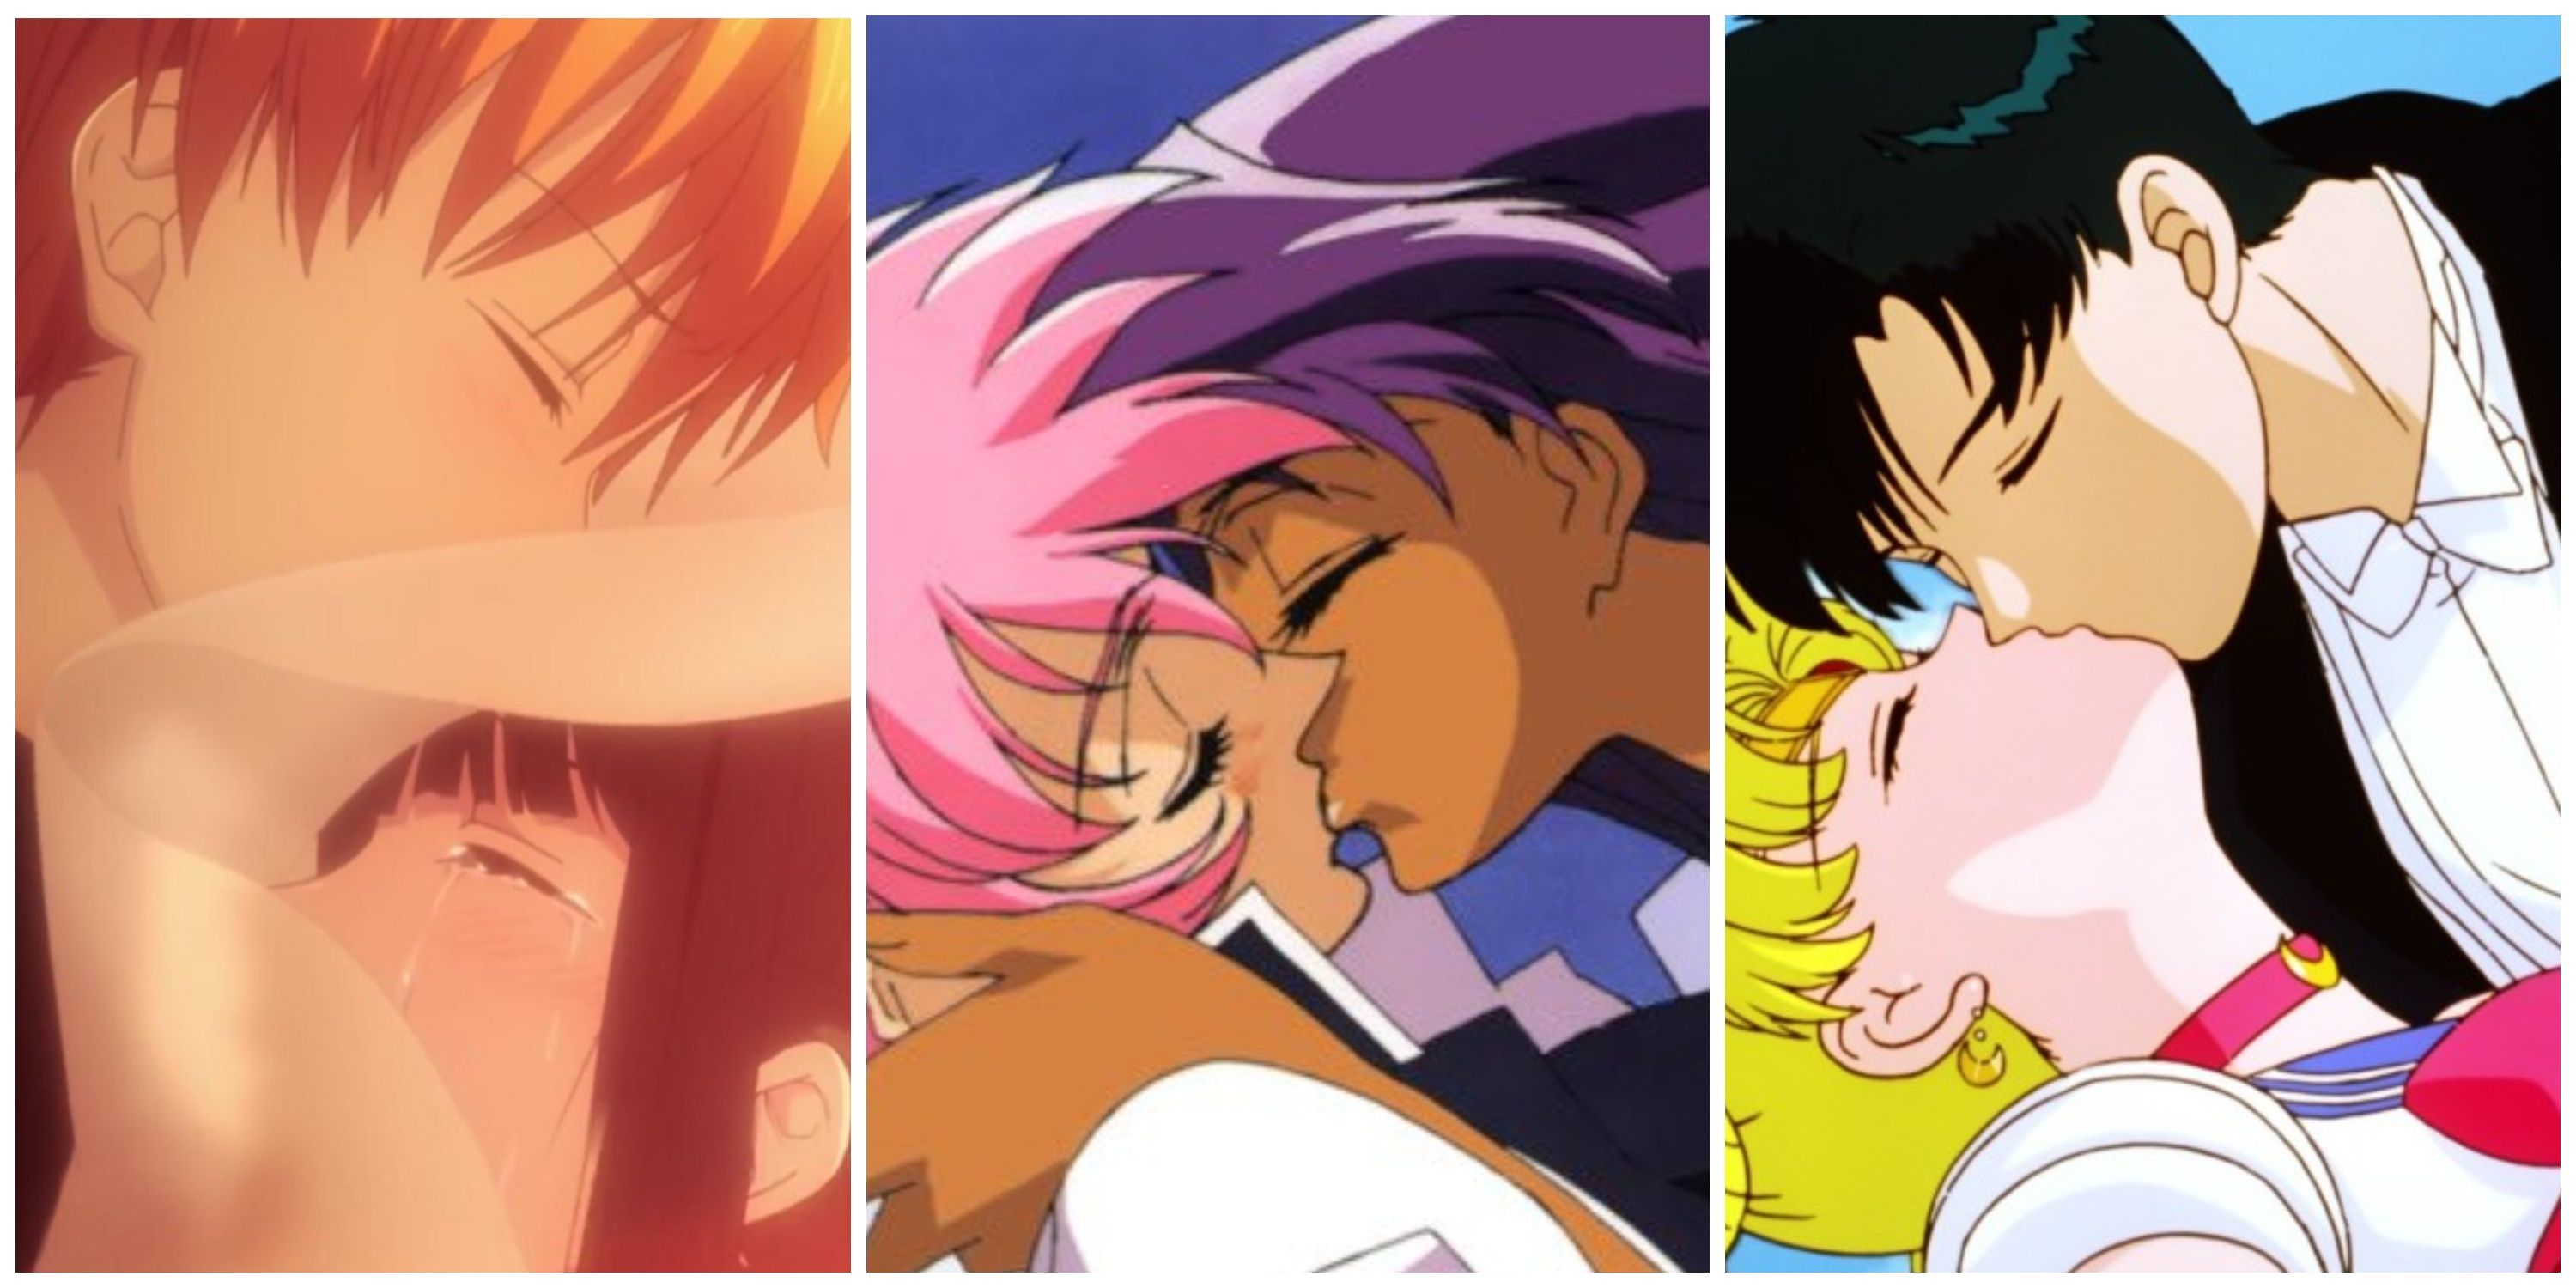 Top 10 Adult Romance Anime | Articles on WatchMojo.com